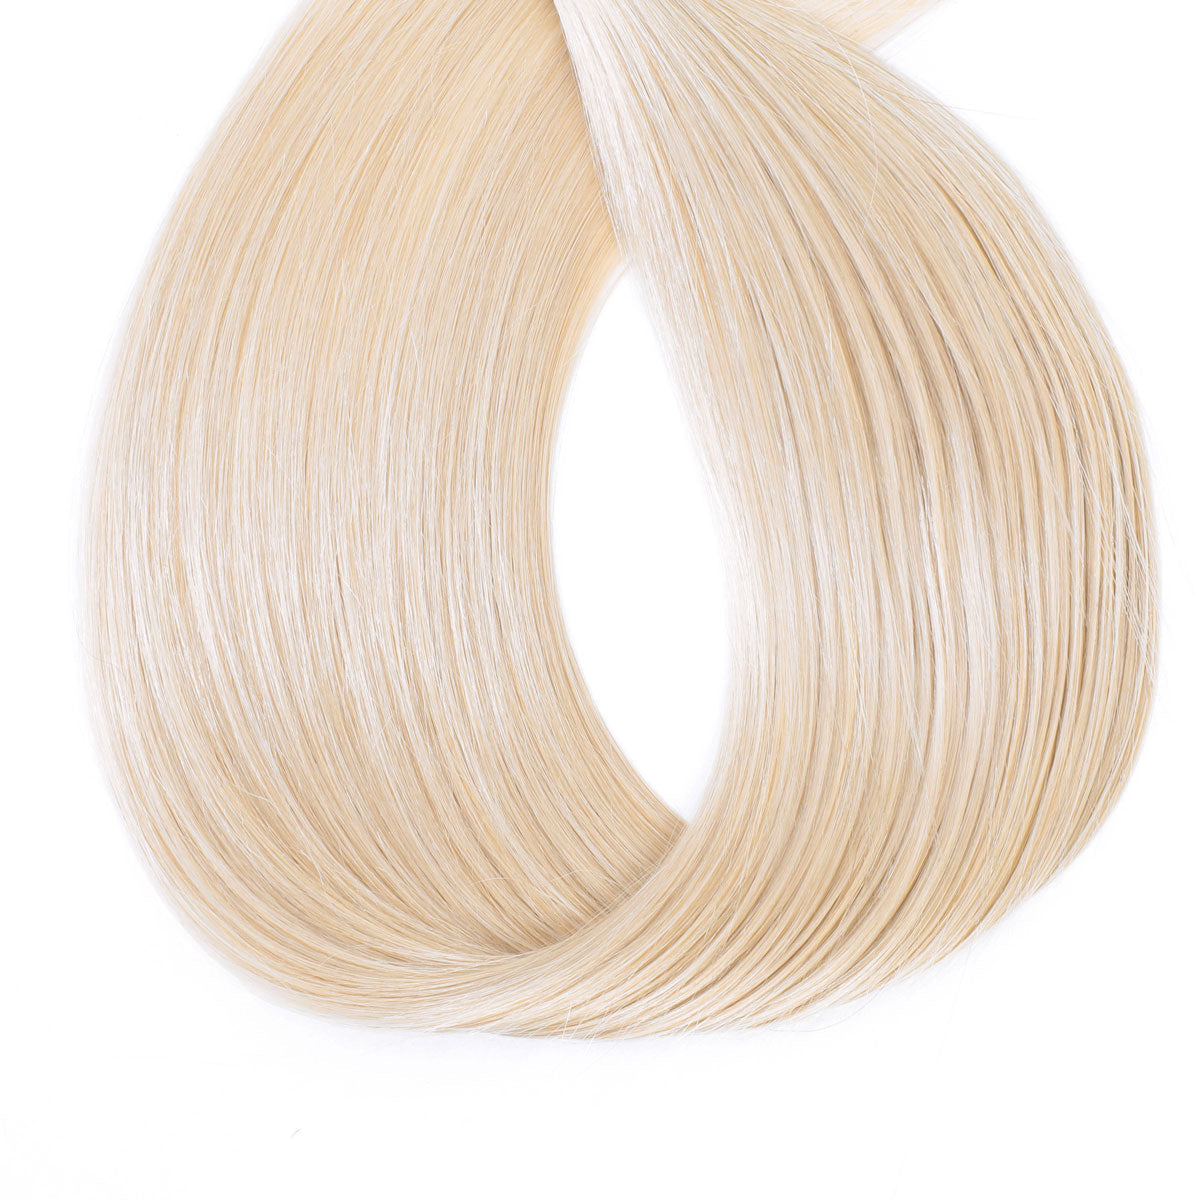 Wefts Blonde Hair Extensions